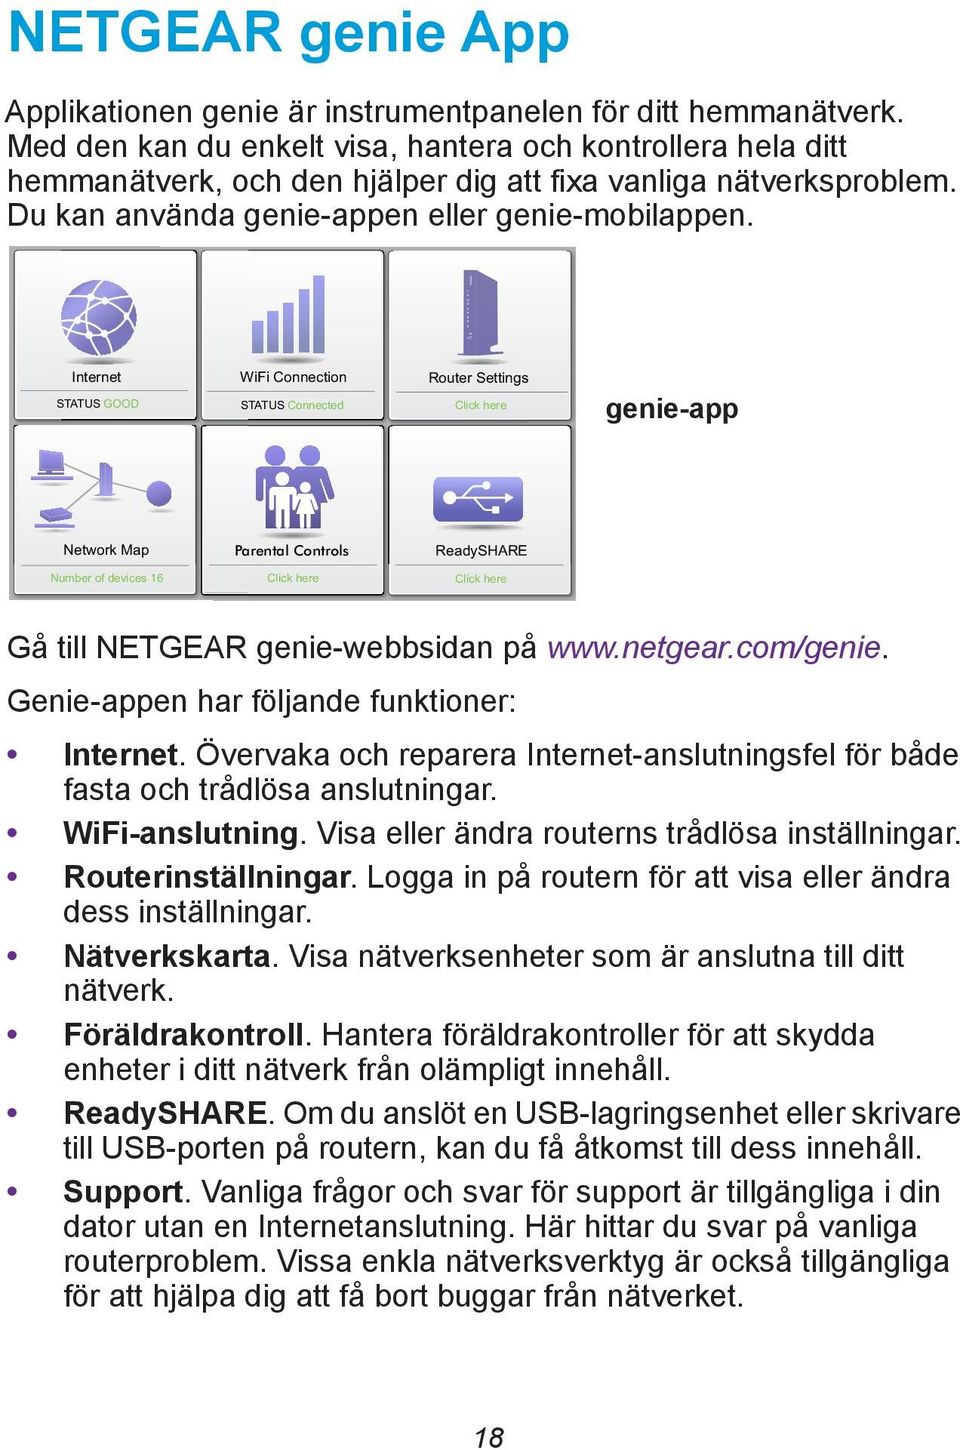 Internet STATUS GOOD WiFi Connection STATUS Connected Router Settings Click here genie-app Network Map Parental Controls ReadySHARE Number of devices 16 Click here Click here Gå till NETGEAR